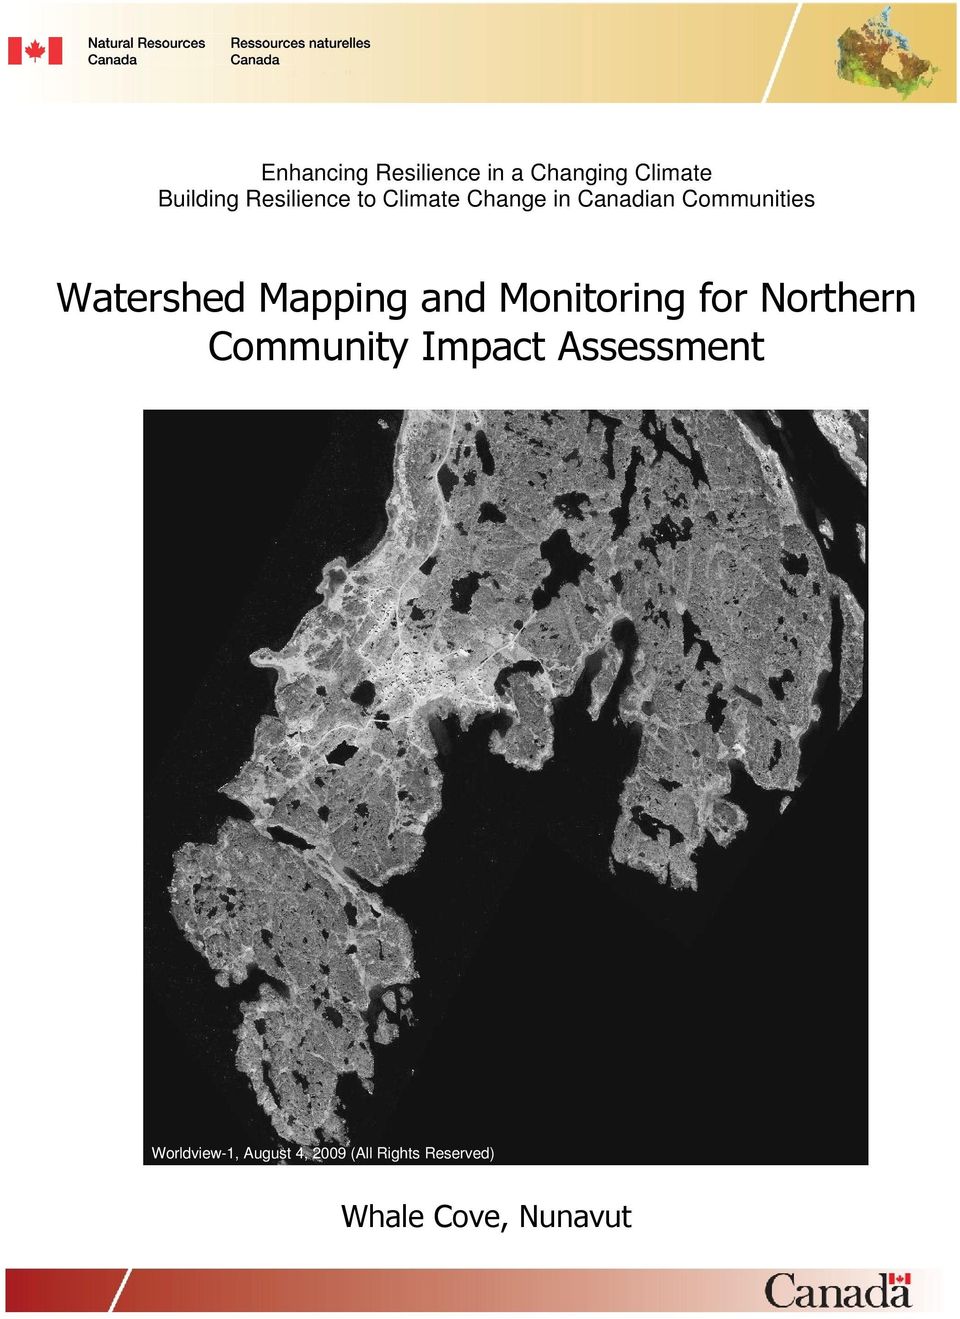 Watershed Mapping and Monitoring for Northern Community